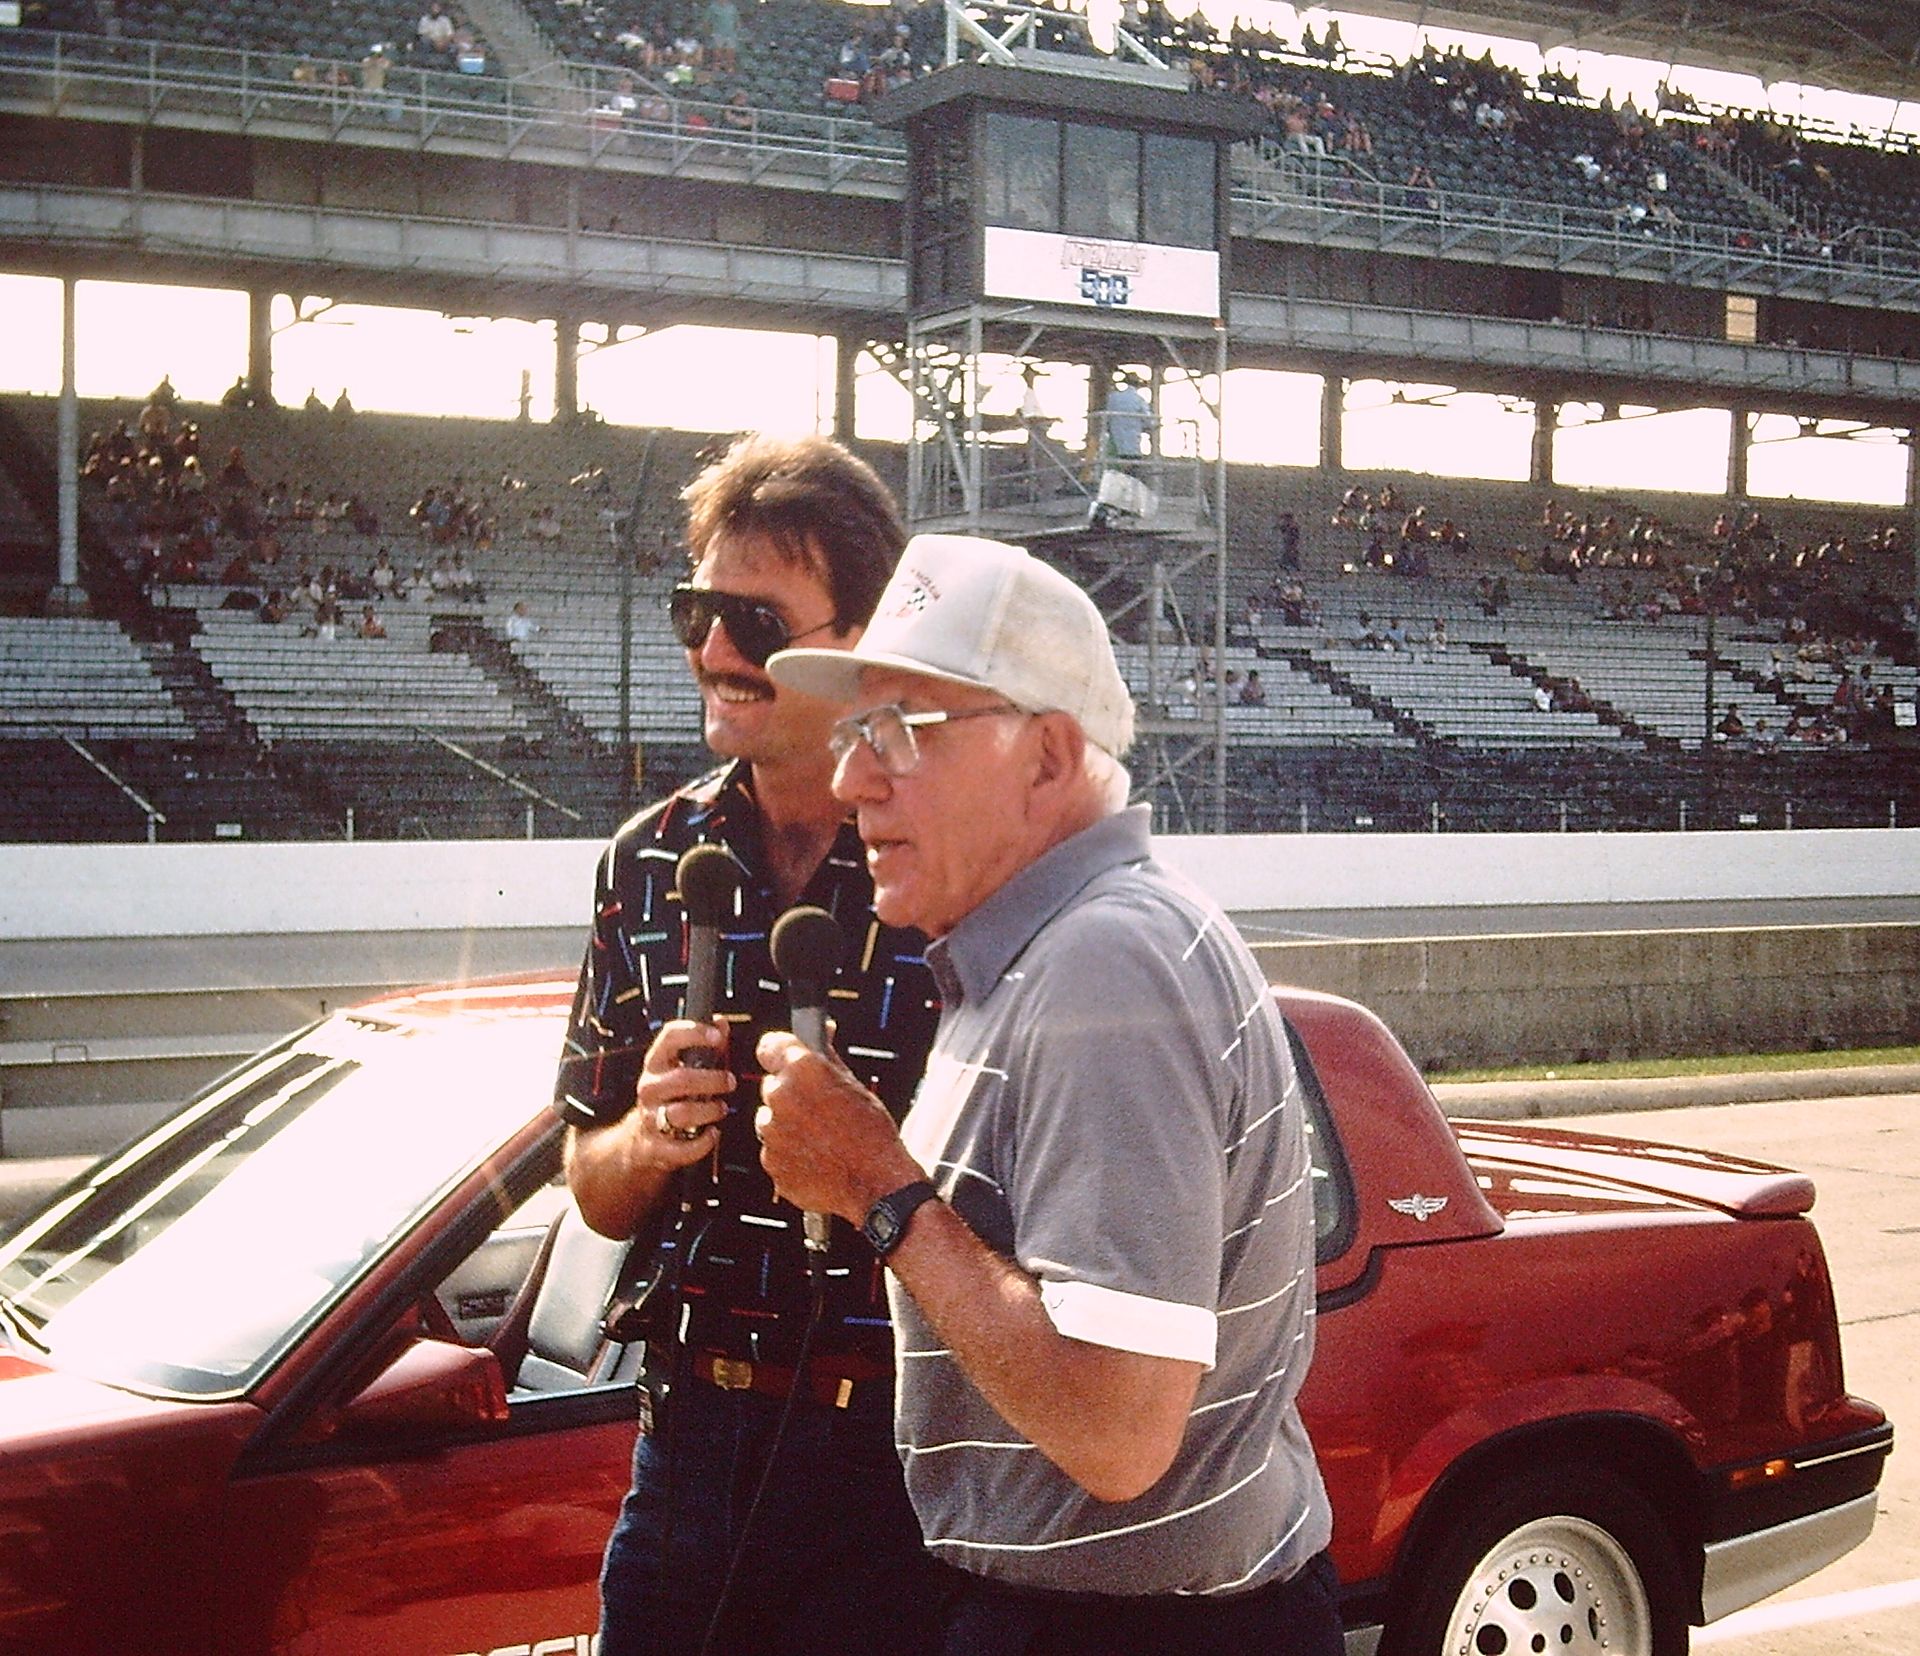 Two men holding microphones stand next to a pace car in Pit Row at the Indianapolis 500 Racetrack.